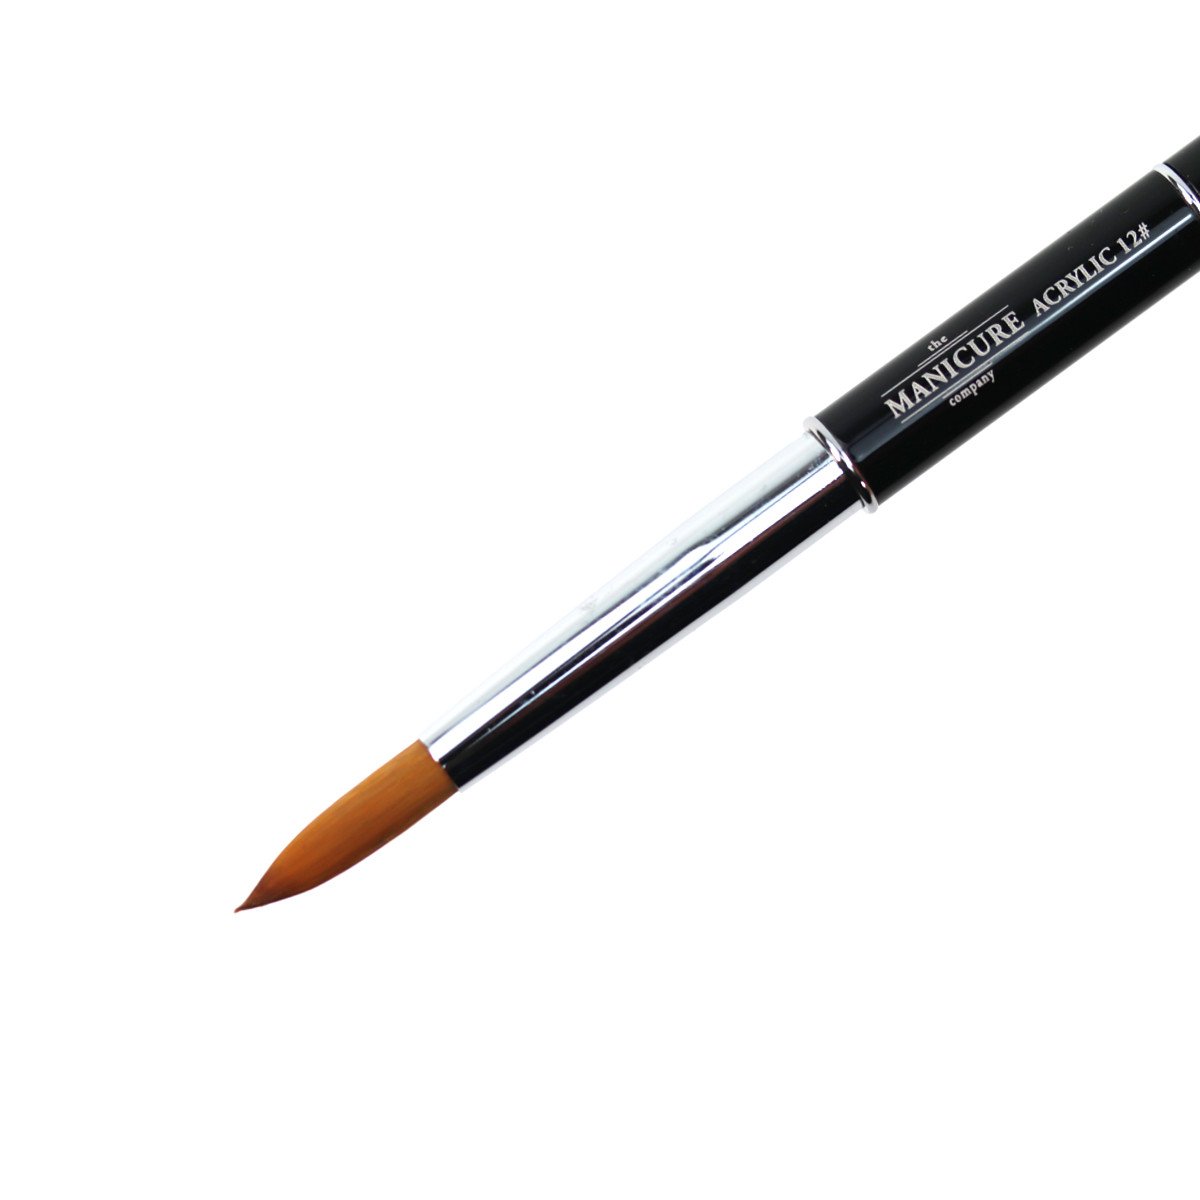 Buy SHILLS PROFESSIONAL Nail Art Acrylic Brush Wood Online at Low Prices in  India - Amazon.in